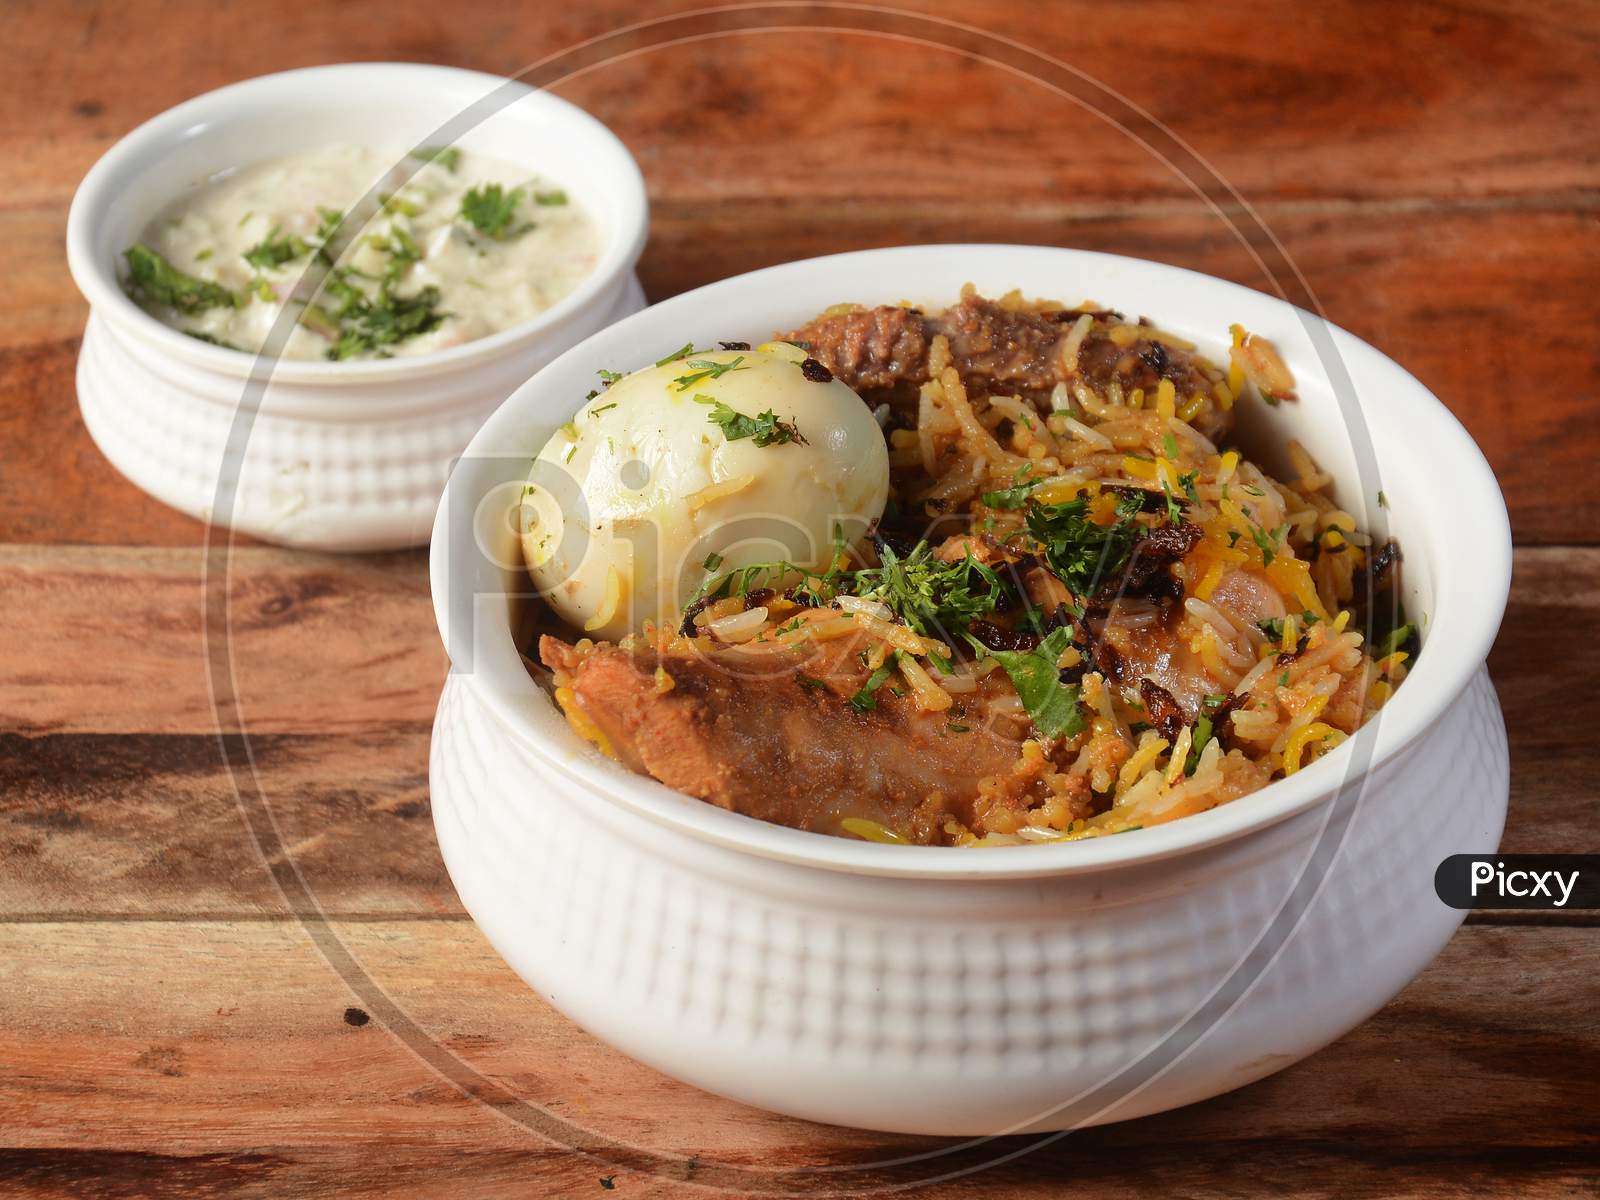 Traditional Hyderabadi Chicken Dum Biryani Made Of Basmati Rice Cooked With Masala Spices, Served With Boiled Egg And Onion Raita, Selective Focus